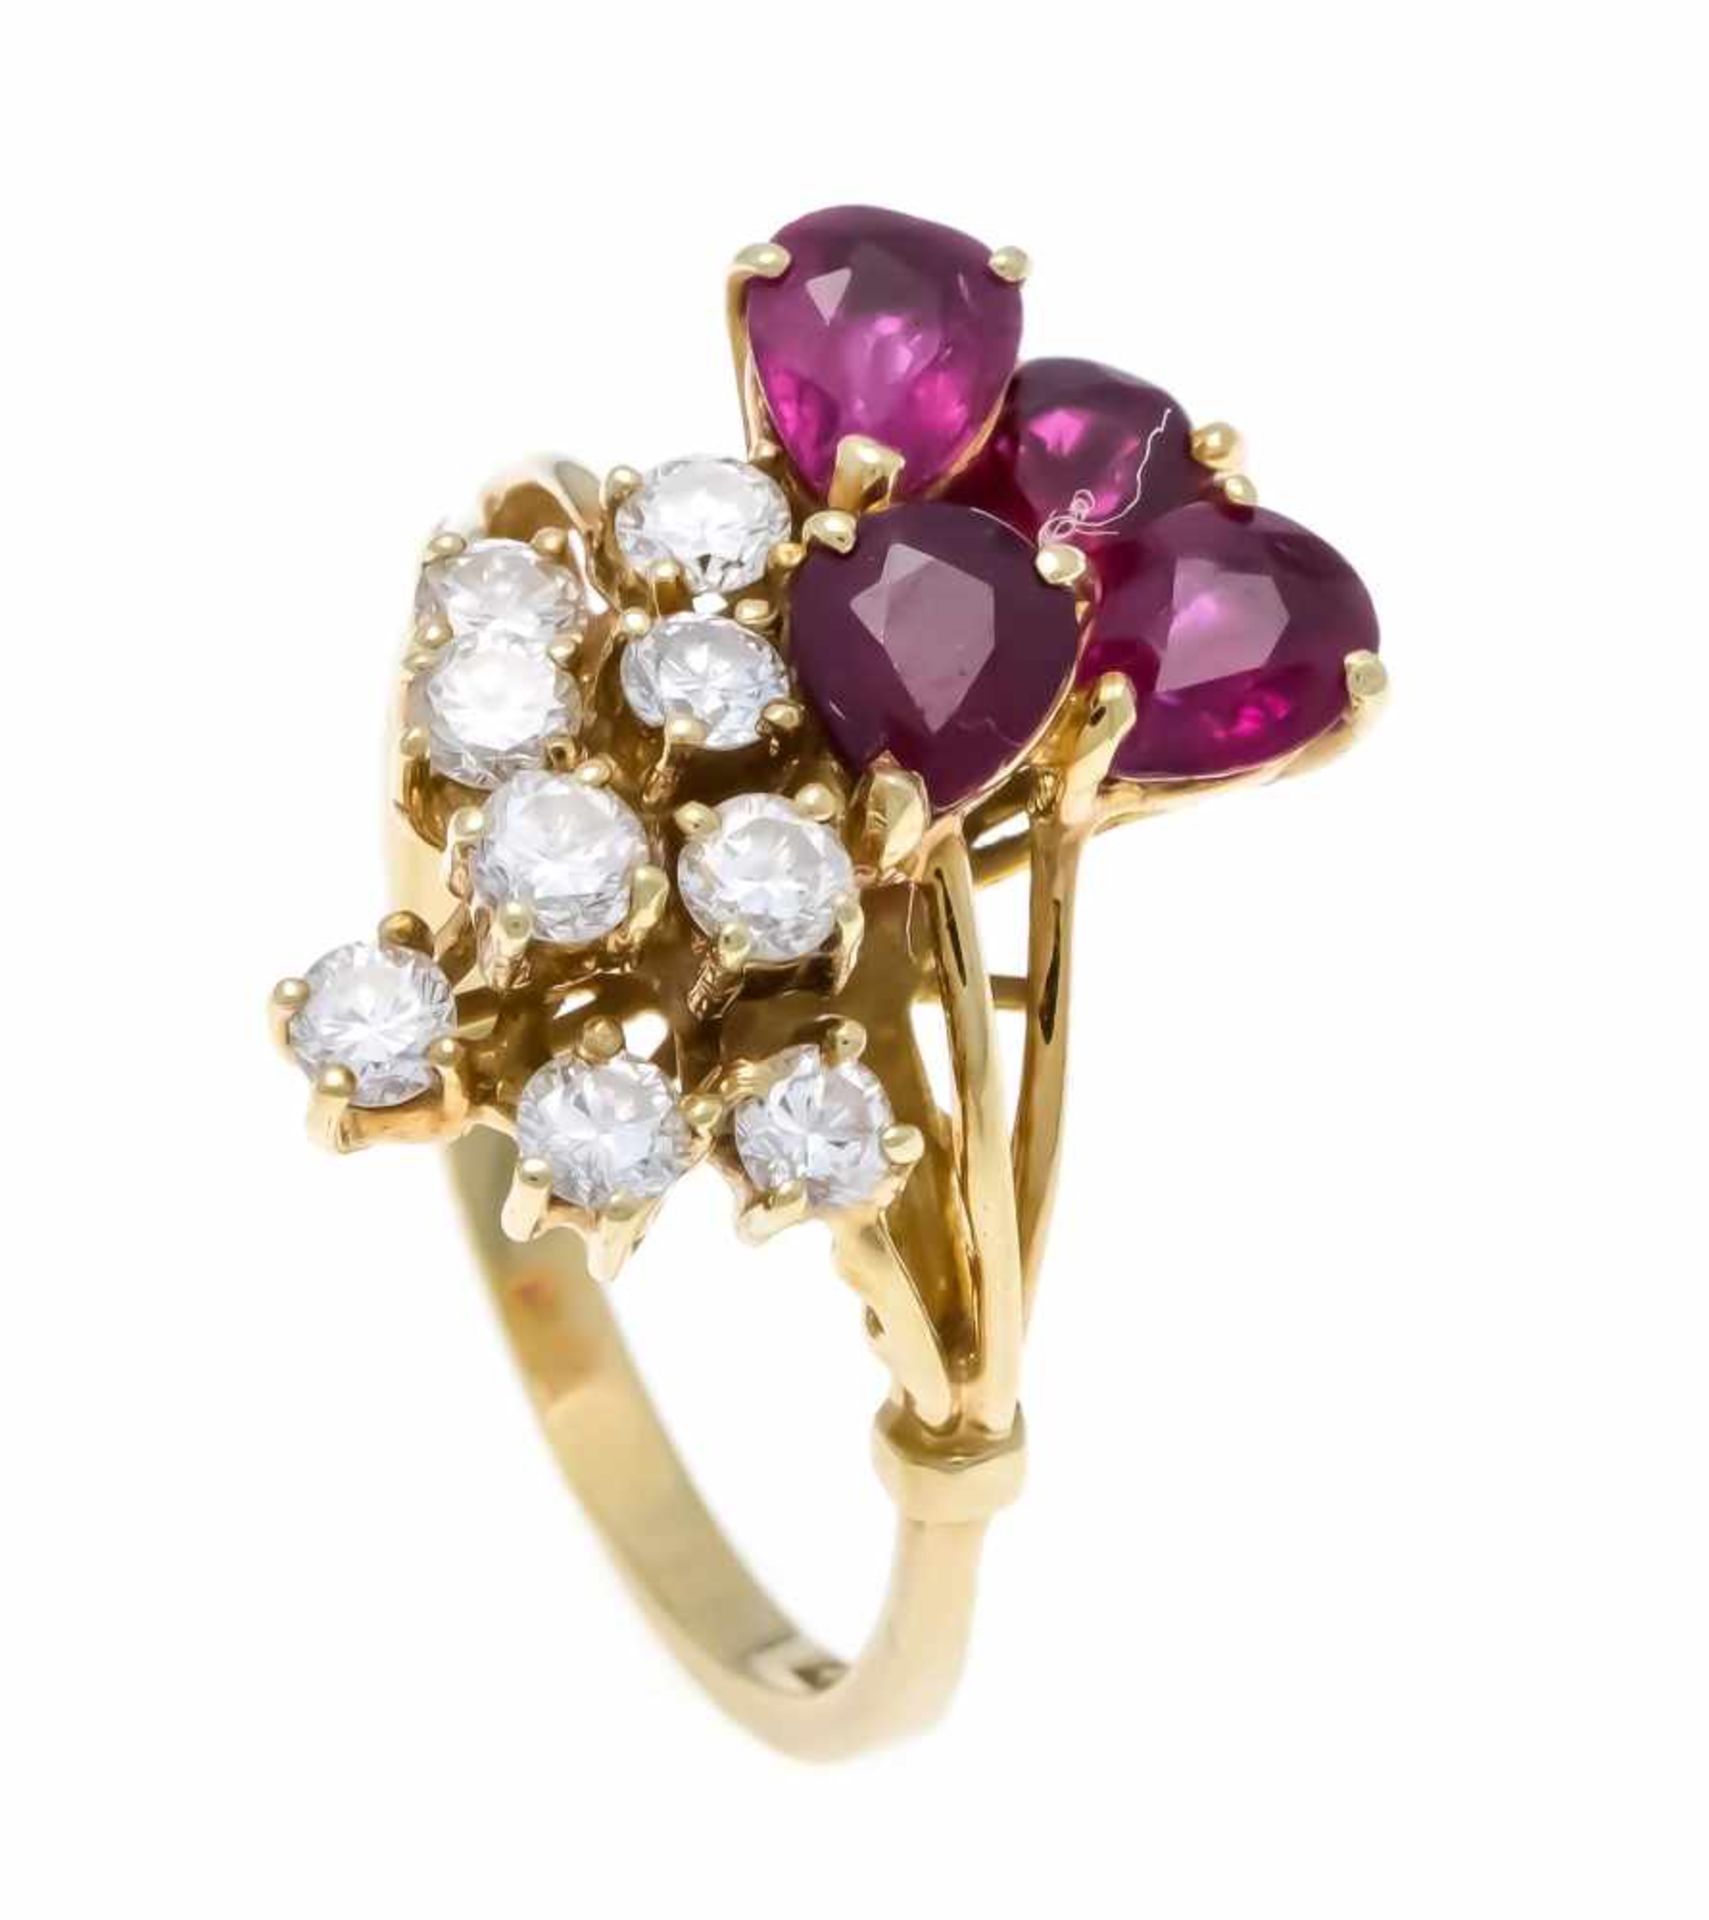 Ruby-Brilliant-Ring GG 585/000 with 4 fac. Ruby-drops 4.8 x 4 mm and 9 diamonds, in